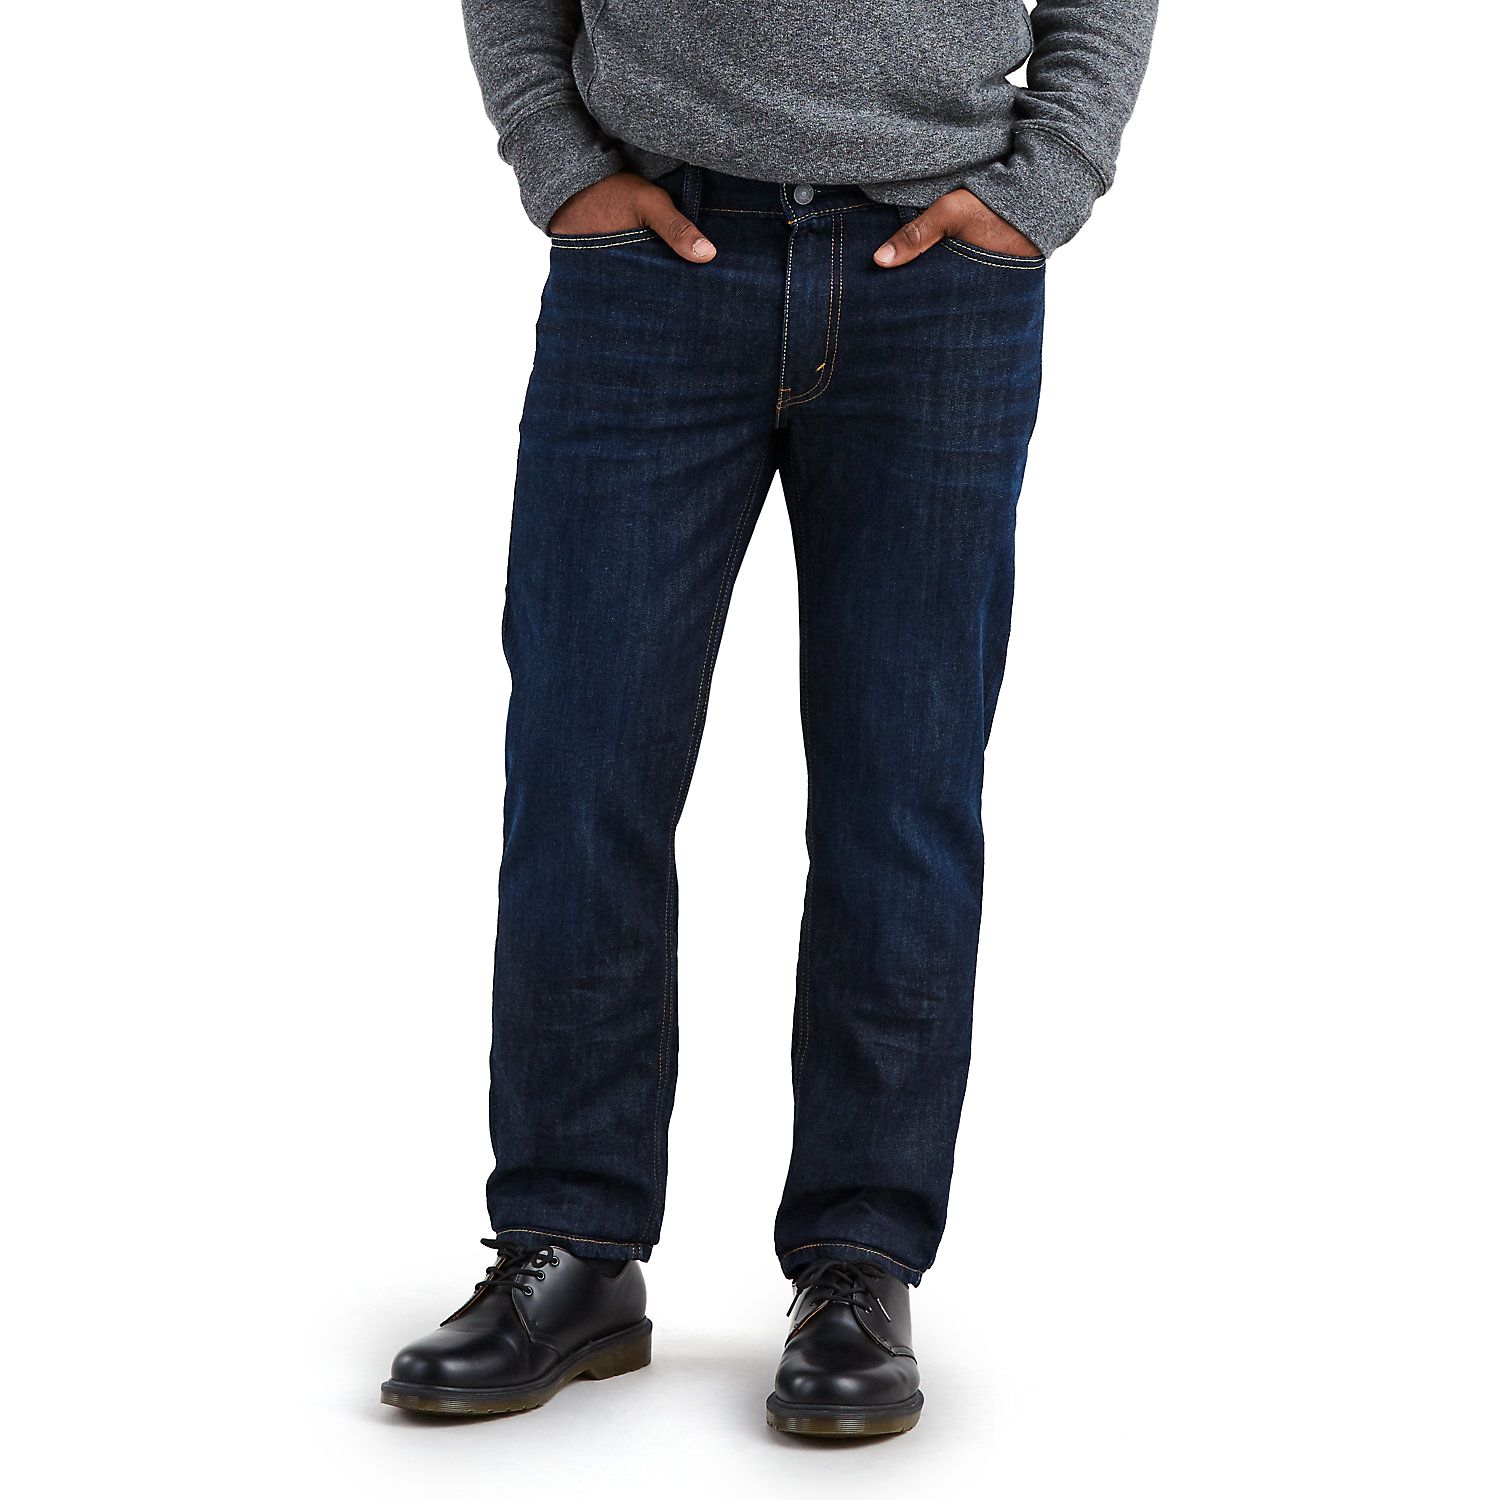 559™ Relaxed Straight-Fit Jeans